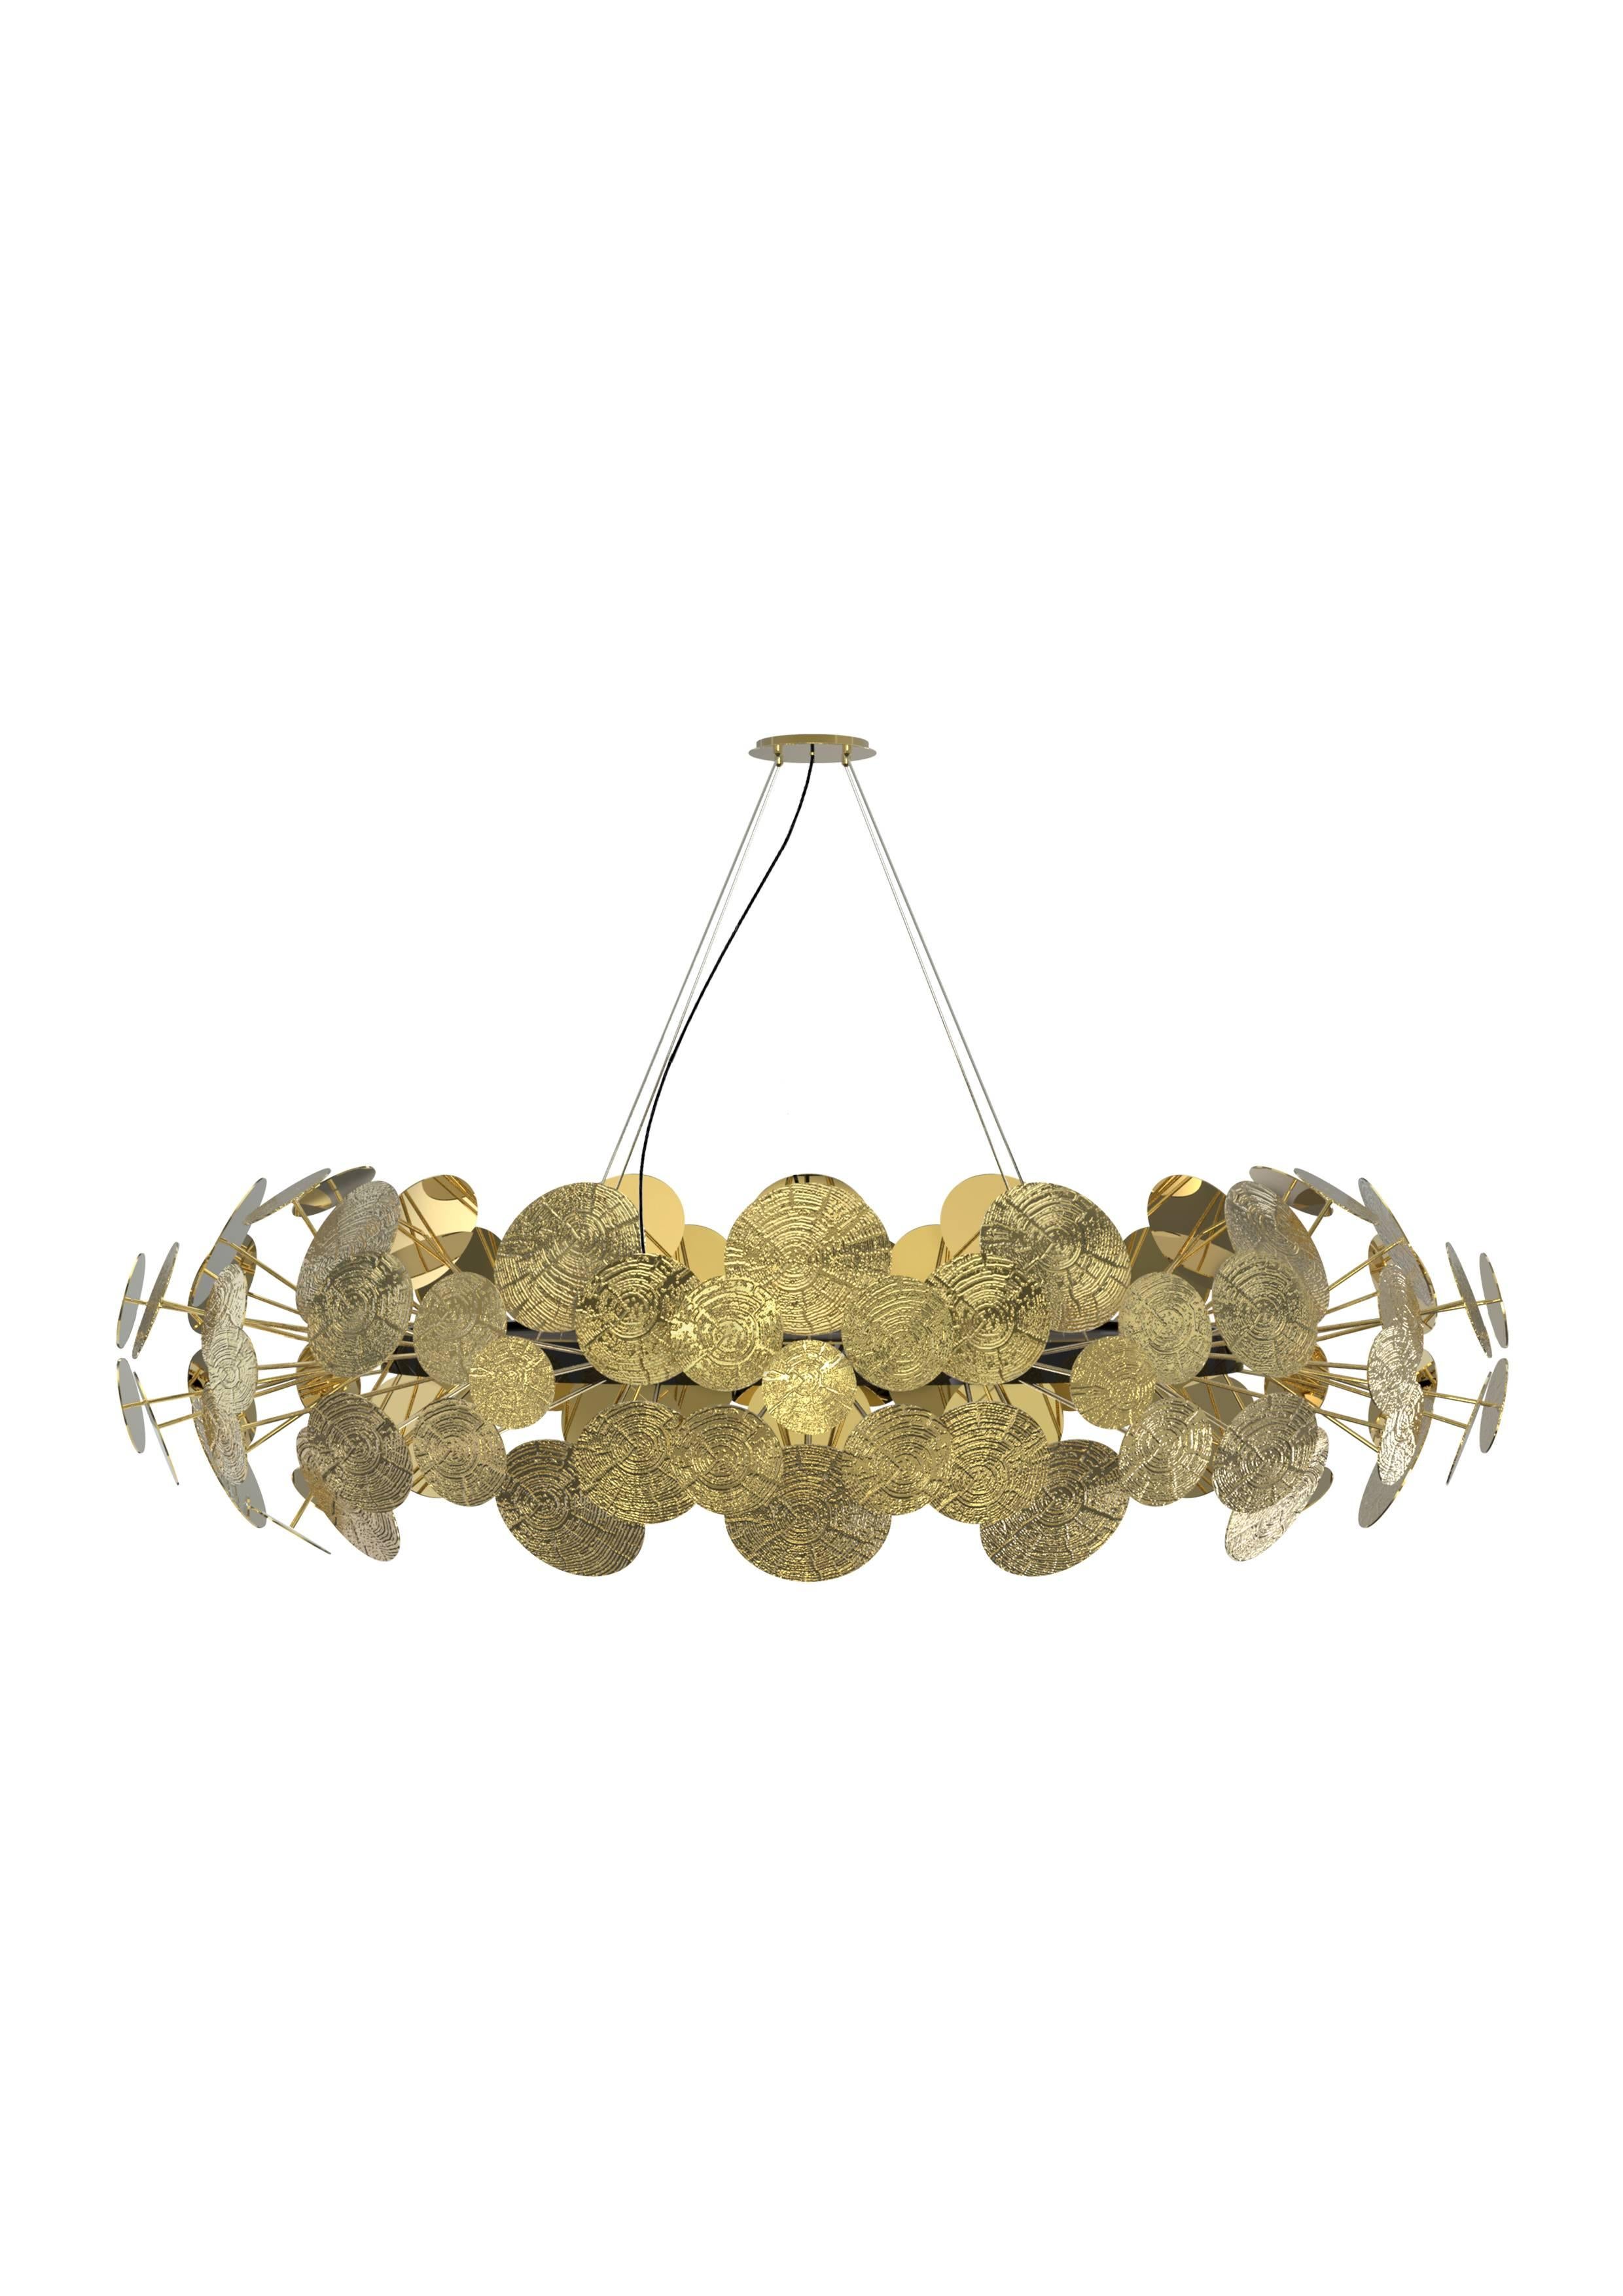 Contemporary Large circular Modern Gold-Plated Newton Chandelier by Boca Do Lobo from Europe For Sale